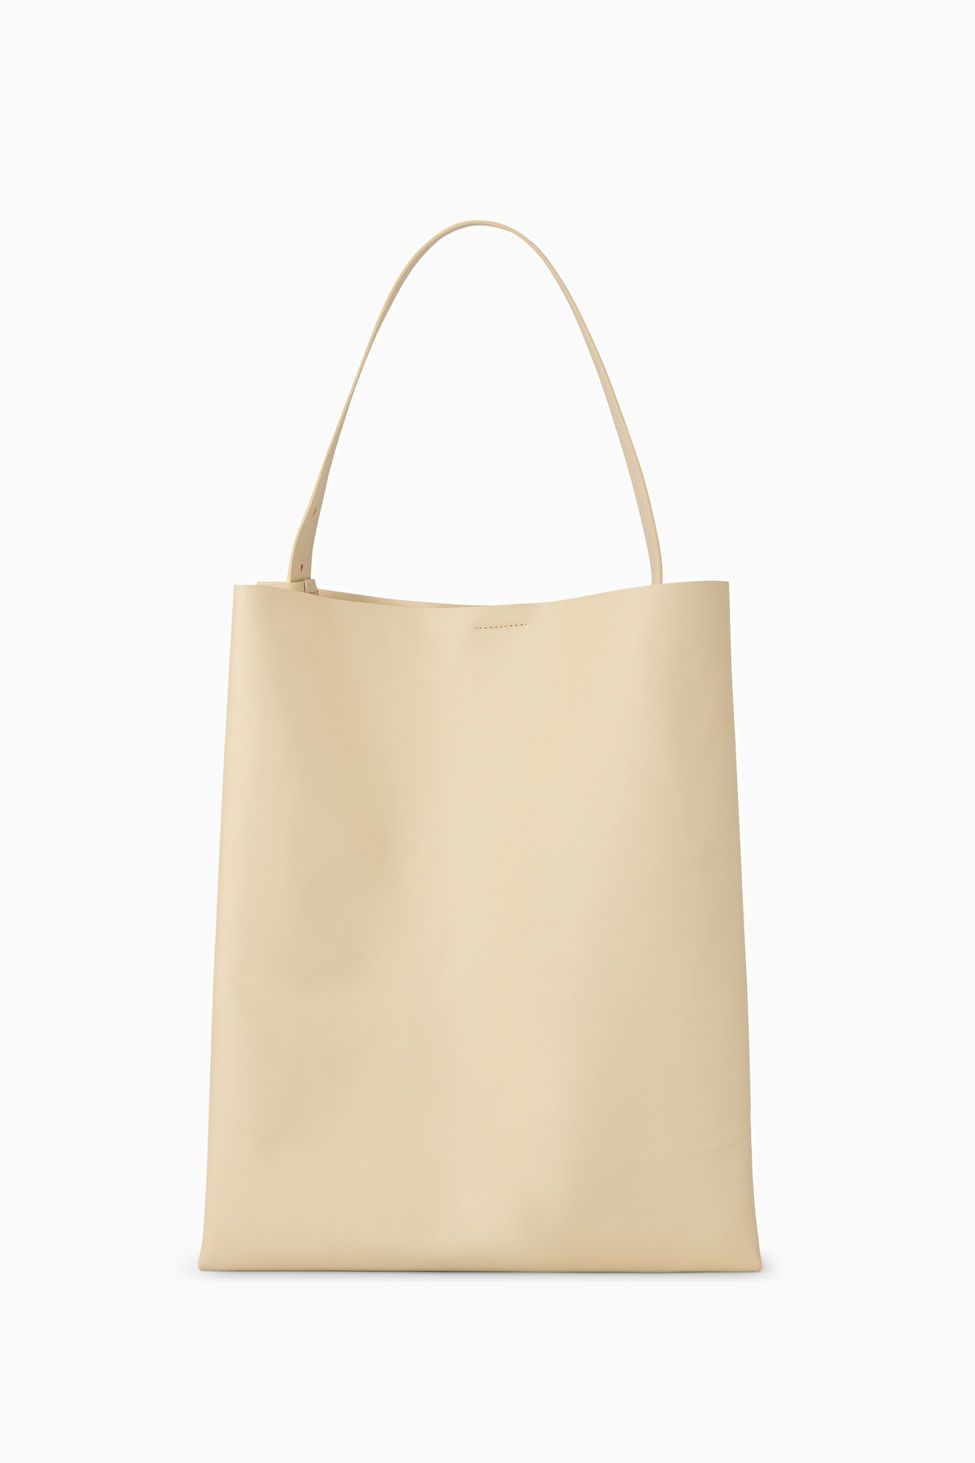 LEATHER TOTE BAG - LIGHT BEIGE - COS | COS UK